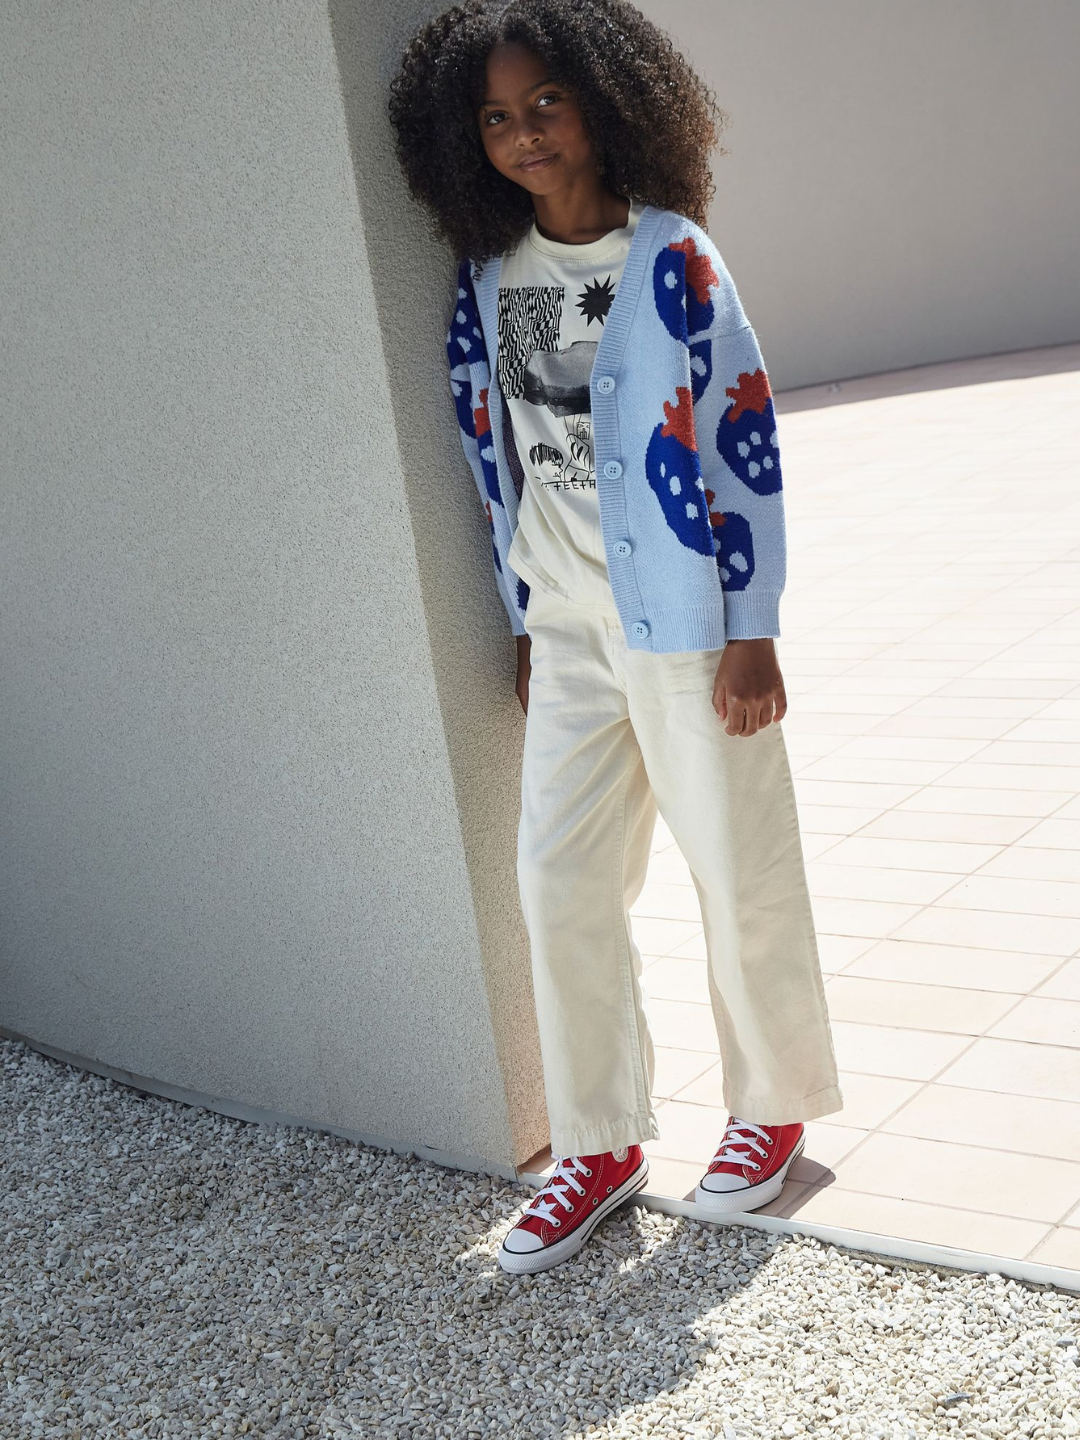 A girl wearing a kids v-neck cardigan in light blue with an all-over pattern of large blue strawberries with a red leaf. She is leaning against a concrete wall in a paved outdoor space with gravel, and wearing a white t-shirt with a black graphic, white jeans, and red hi-top sneakers.